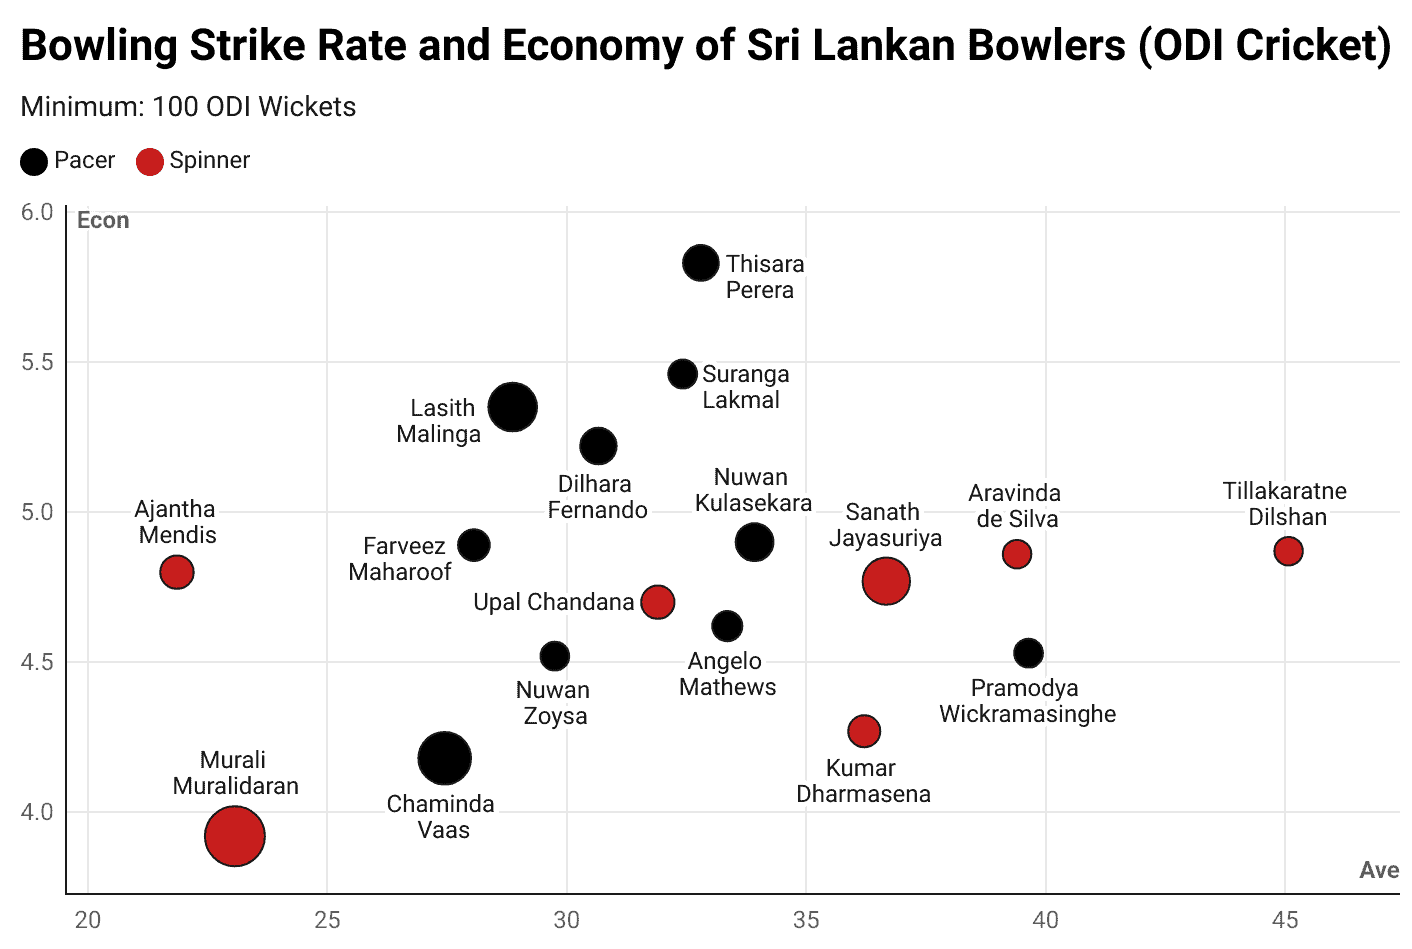 Bowling Strike Rate and Economy of Sri Lankan Bowlers in ODI Cricket